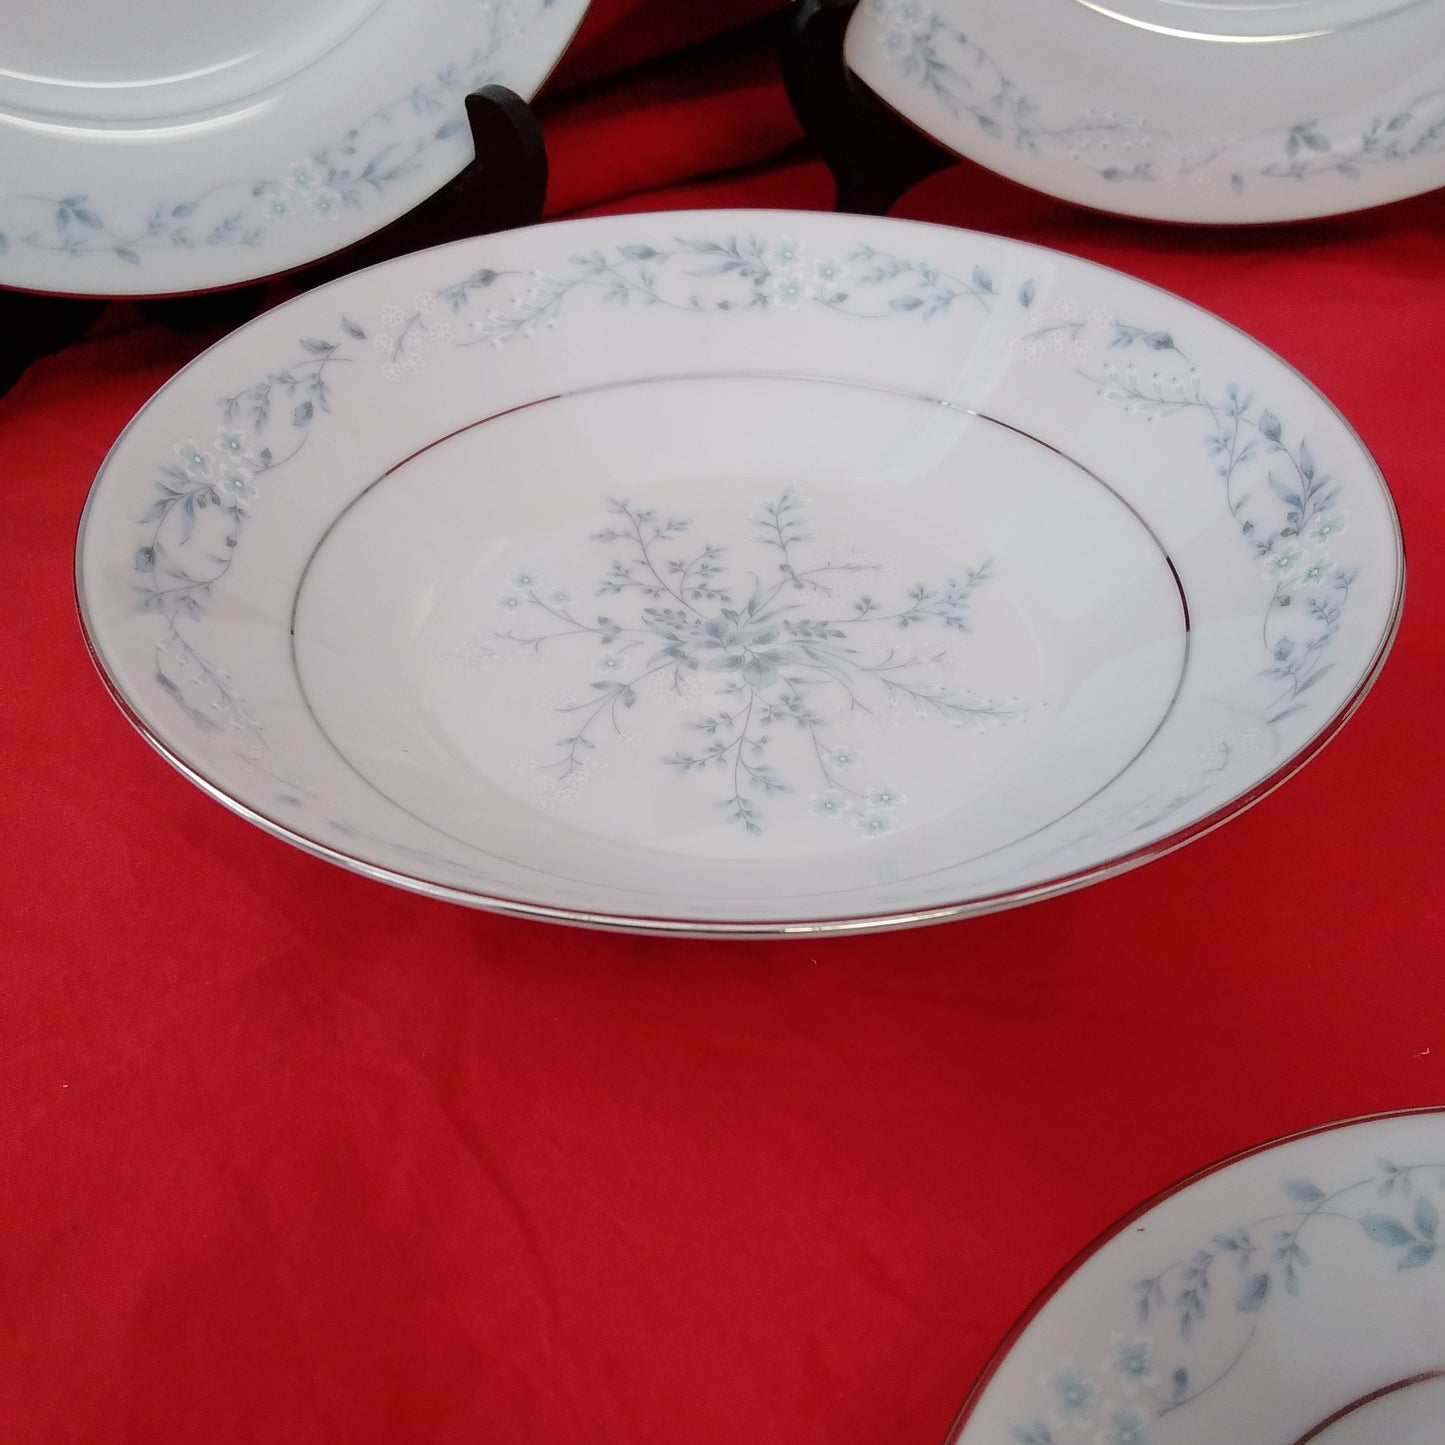 Carolyn by Noritake #2693 - Lot of 5 (7 piece place settings) 35 Pieces